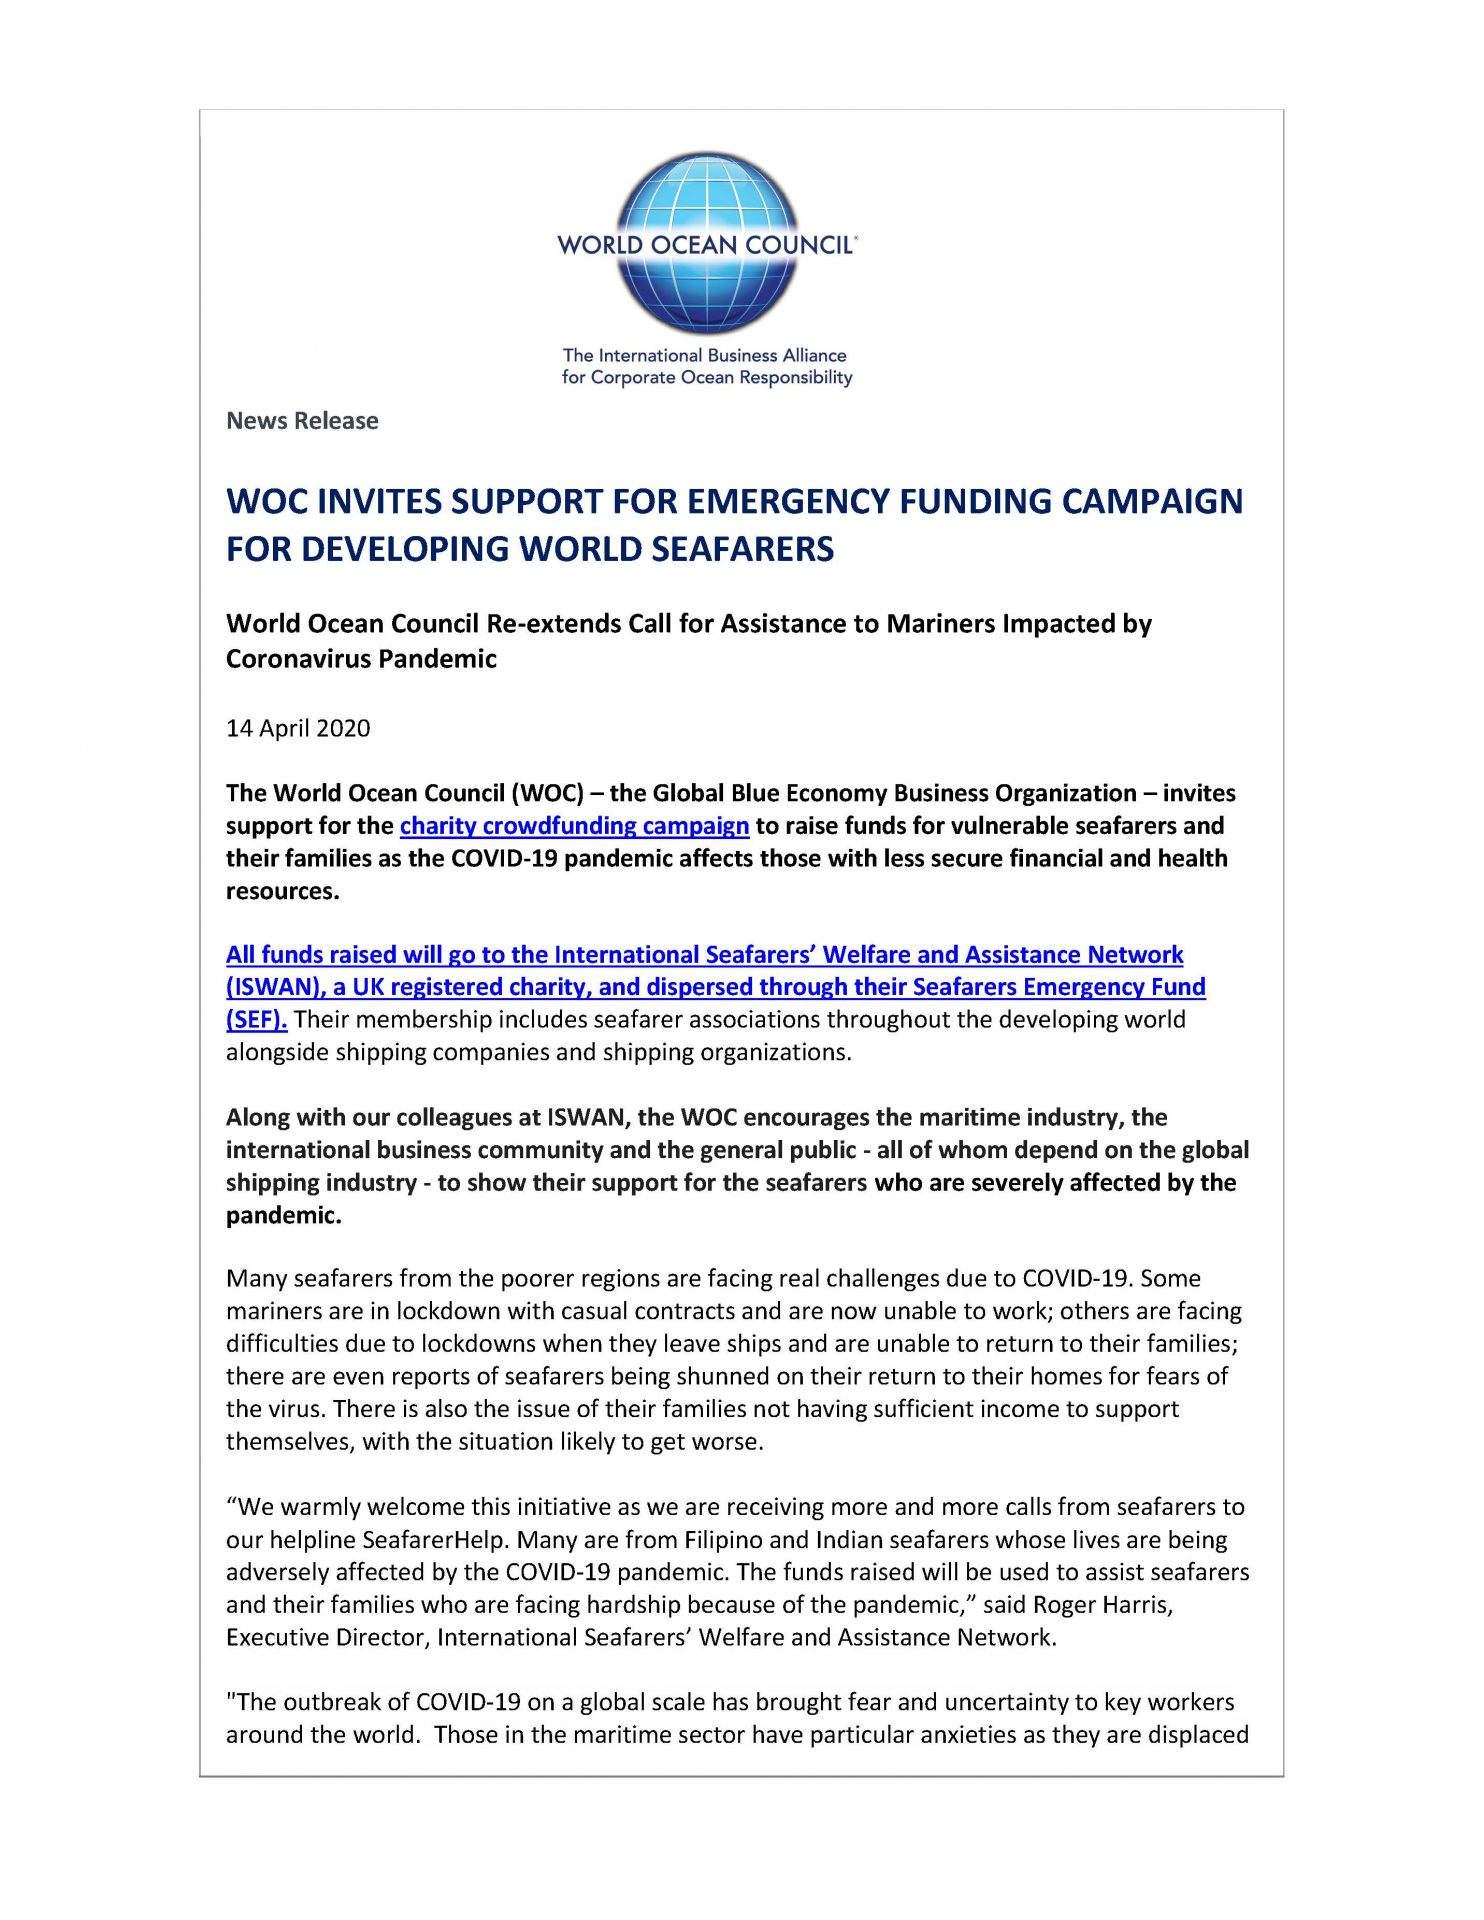 WOC Invites Support for Emergency Funding Campaign for Developing World Seafarers - 14 April 2020